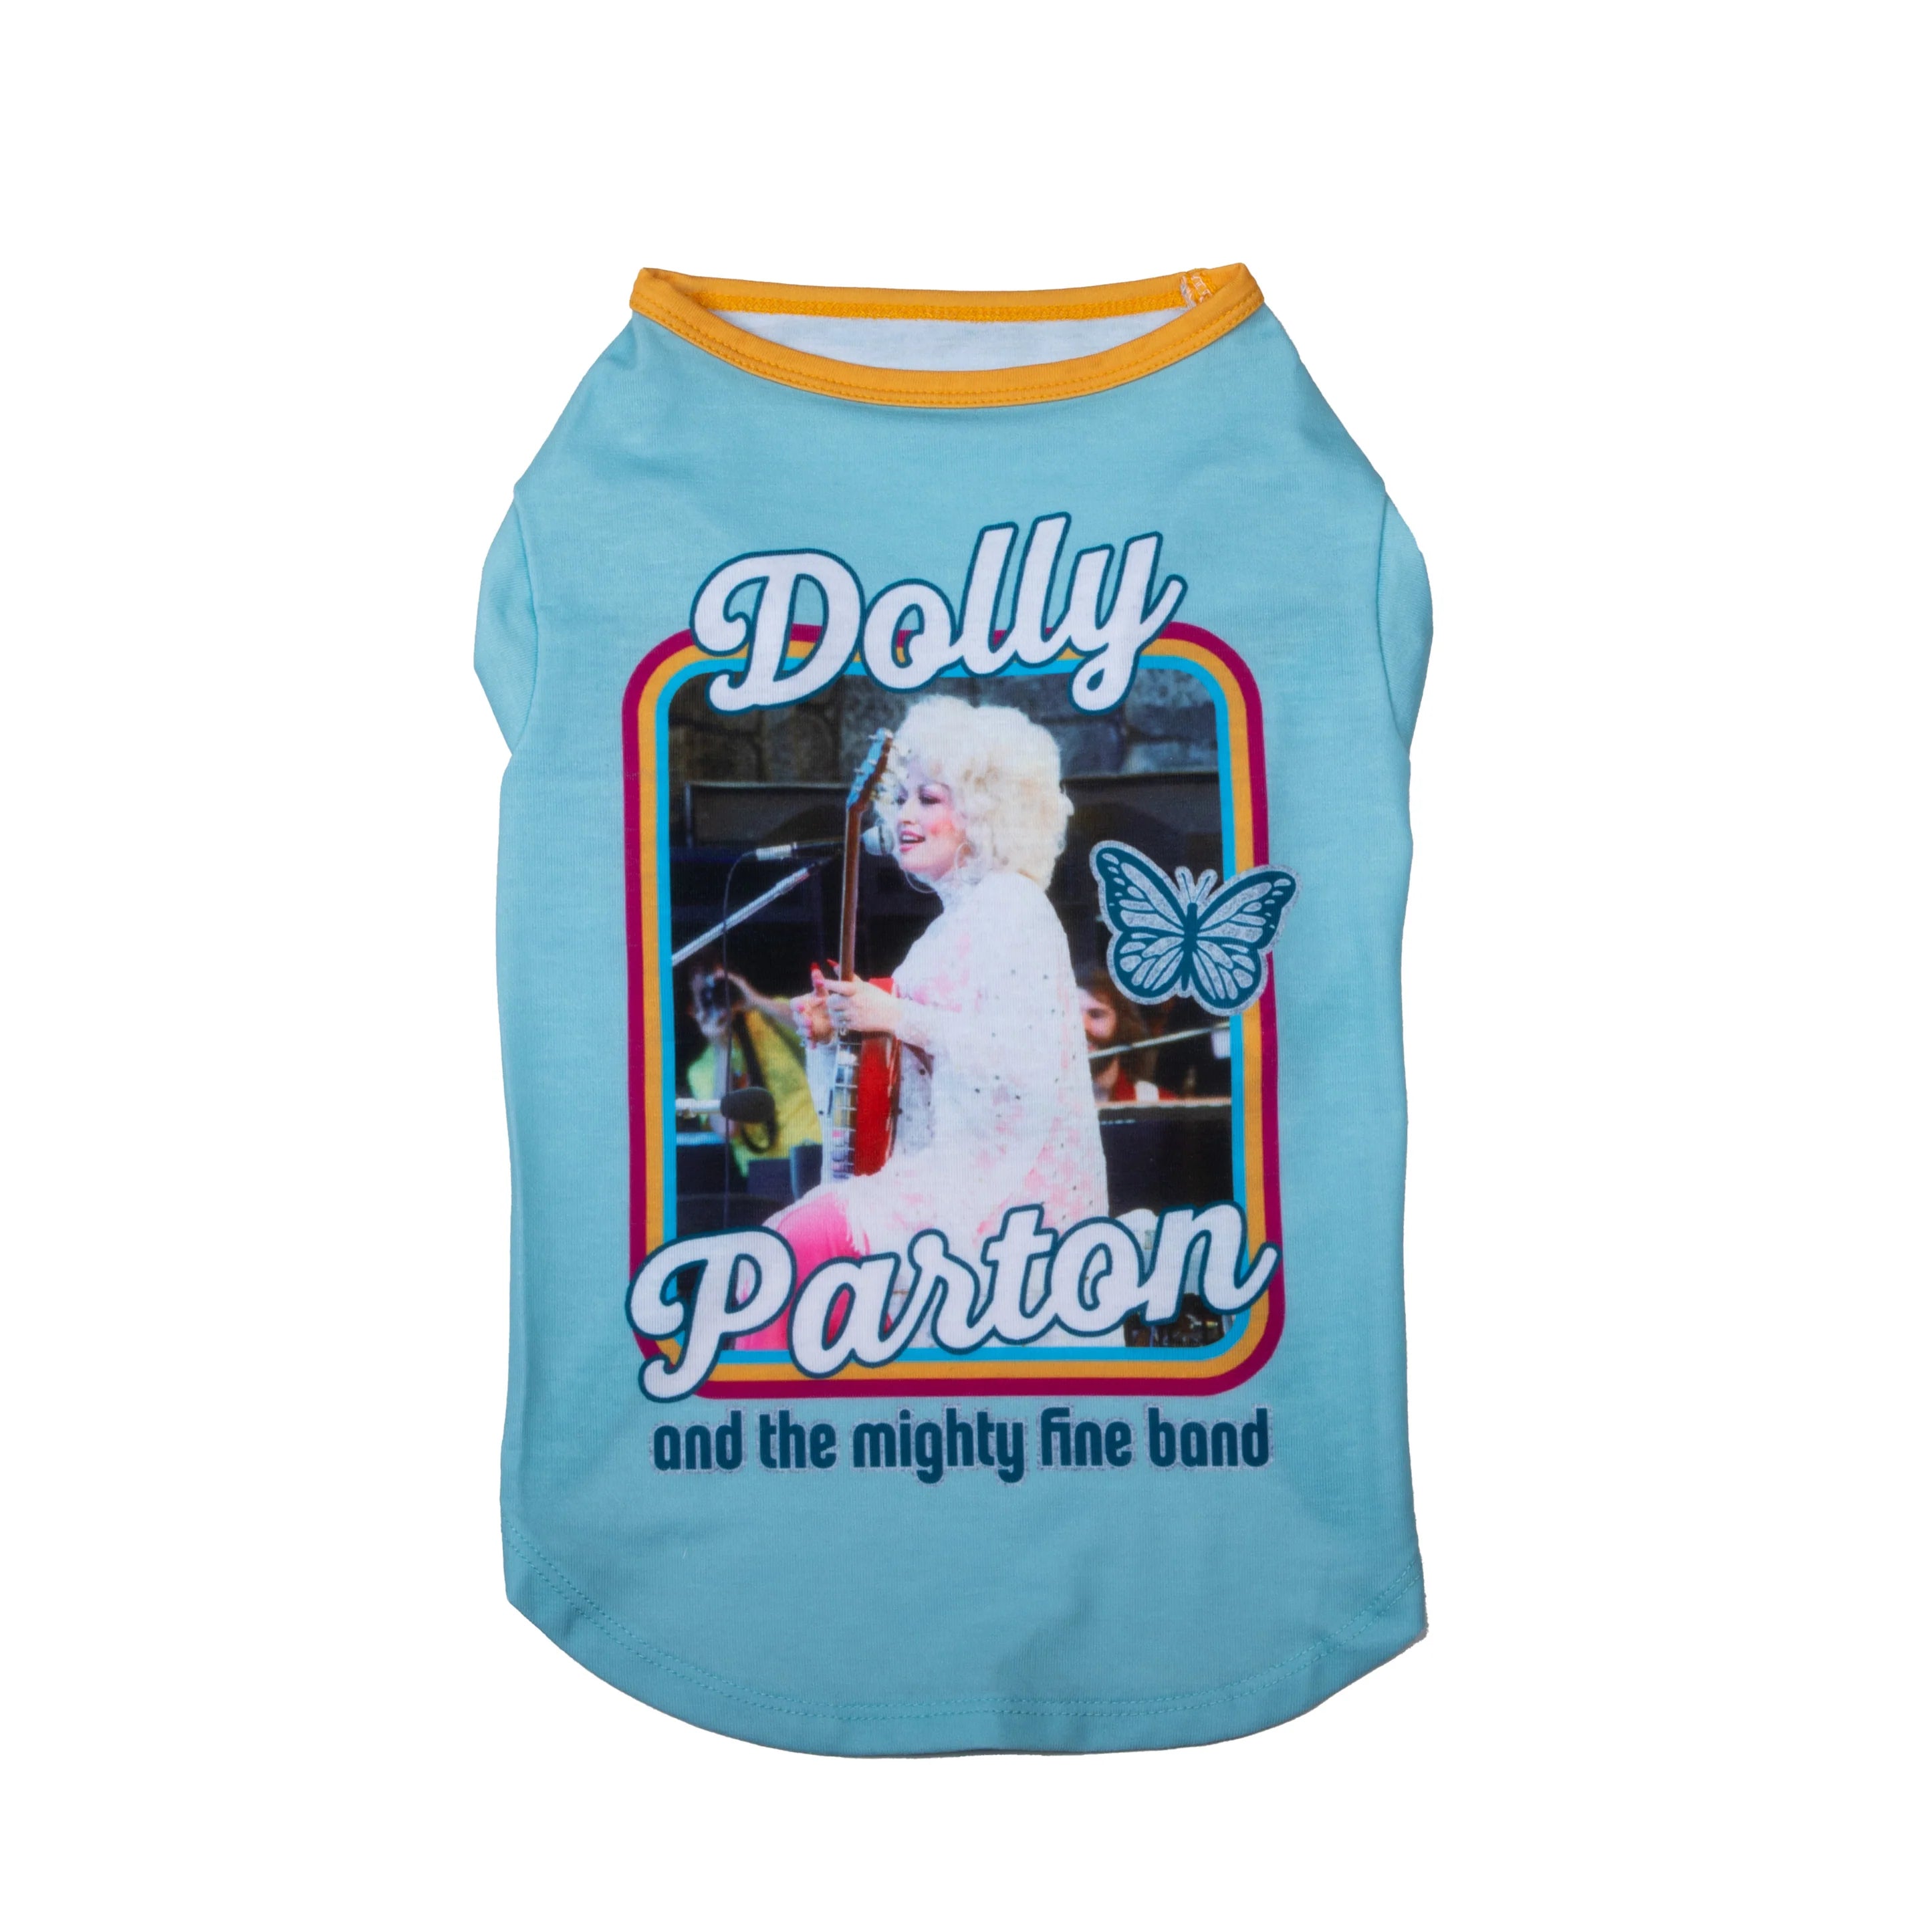 Doggy Parton - Blue Dolly & The Mighty Fine Band Shirt for Pets